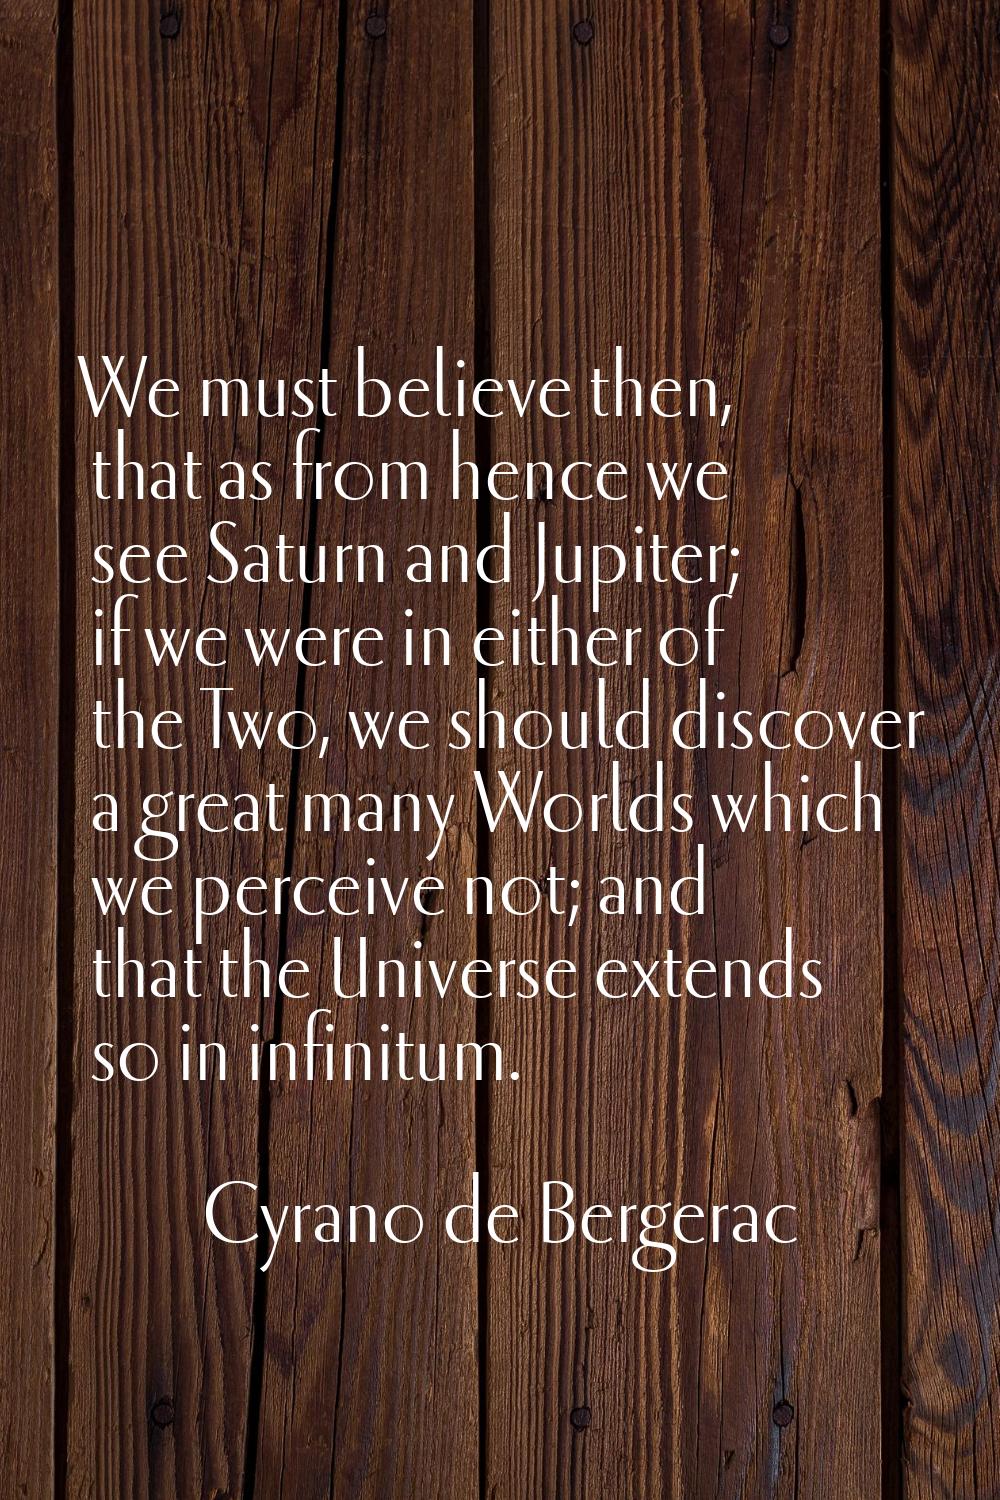 We must believe then, that as from hence we see Saturn and Jupiter; if we were in either of the Two